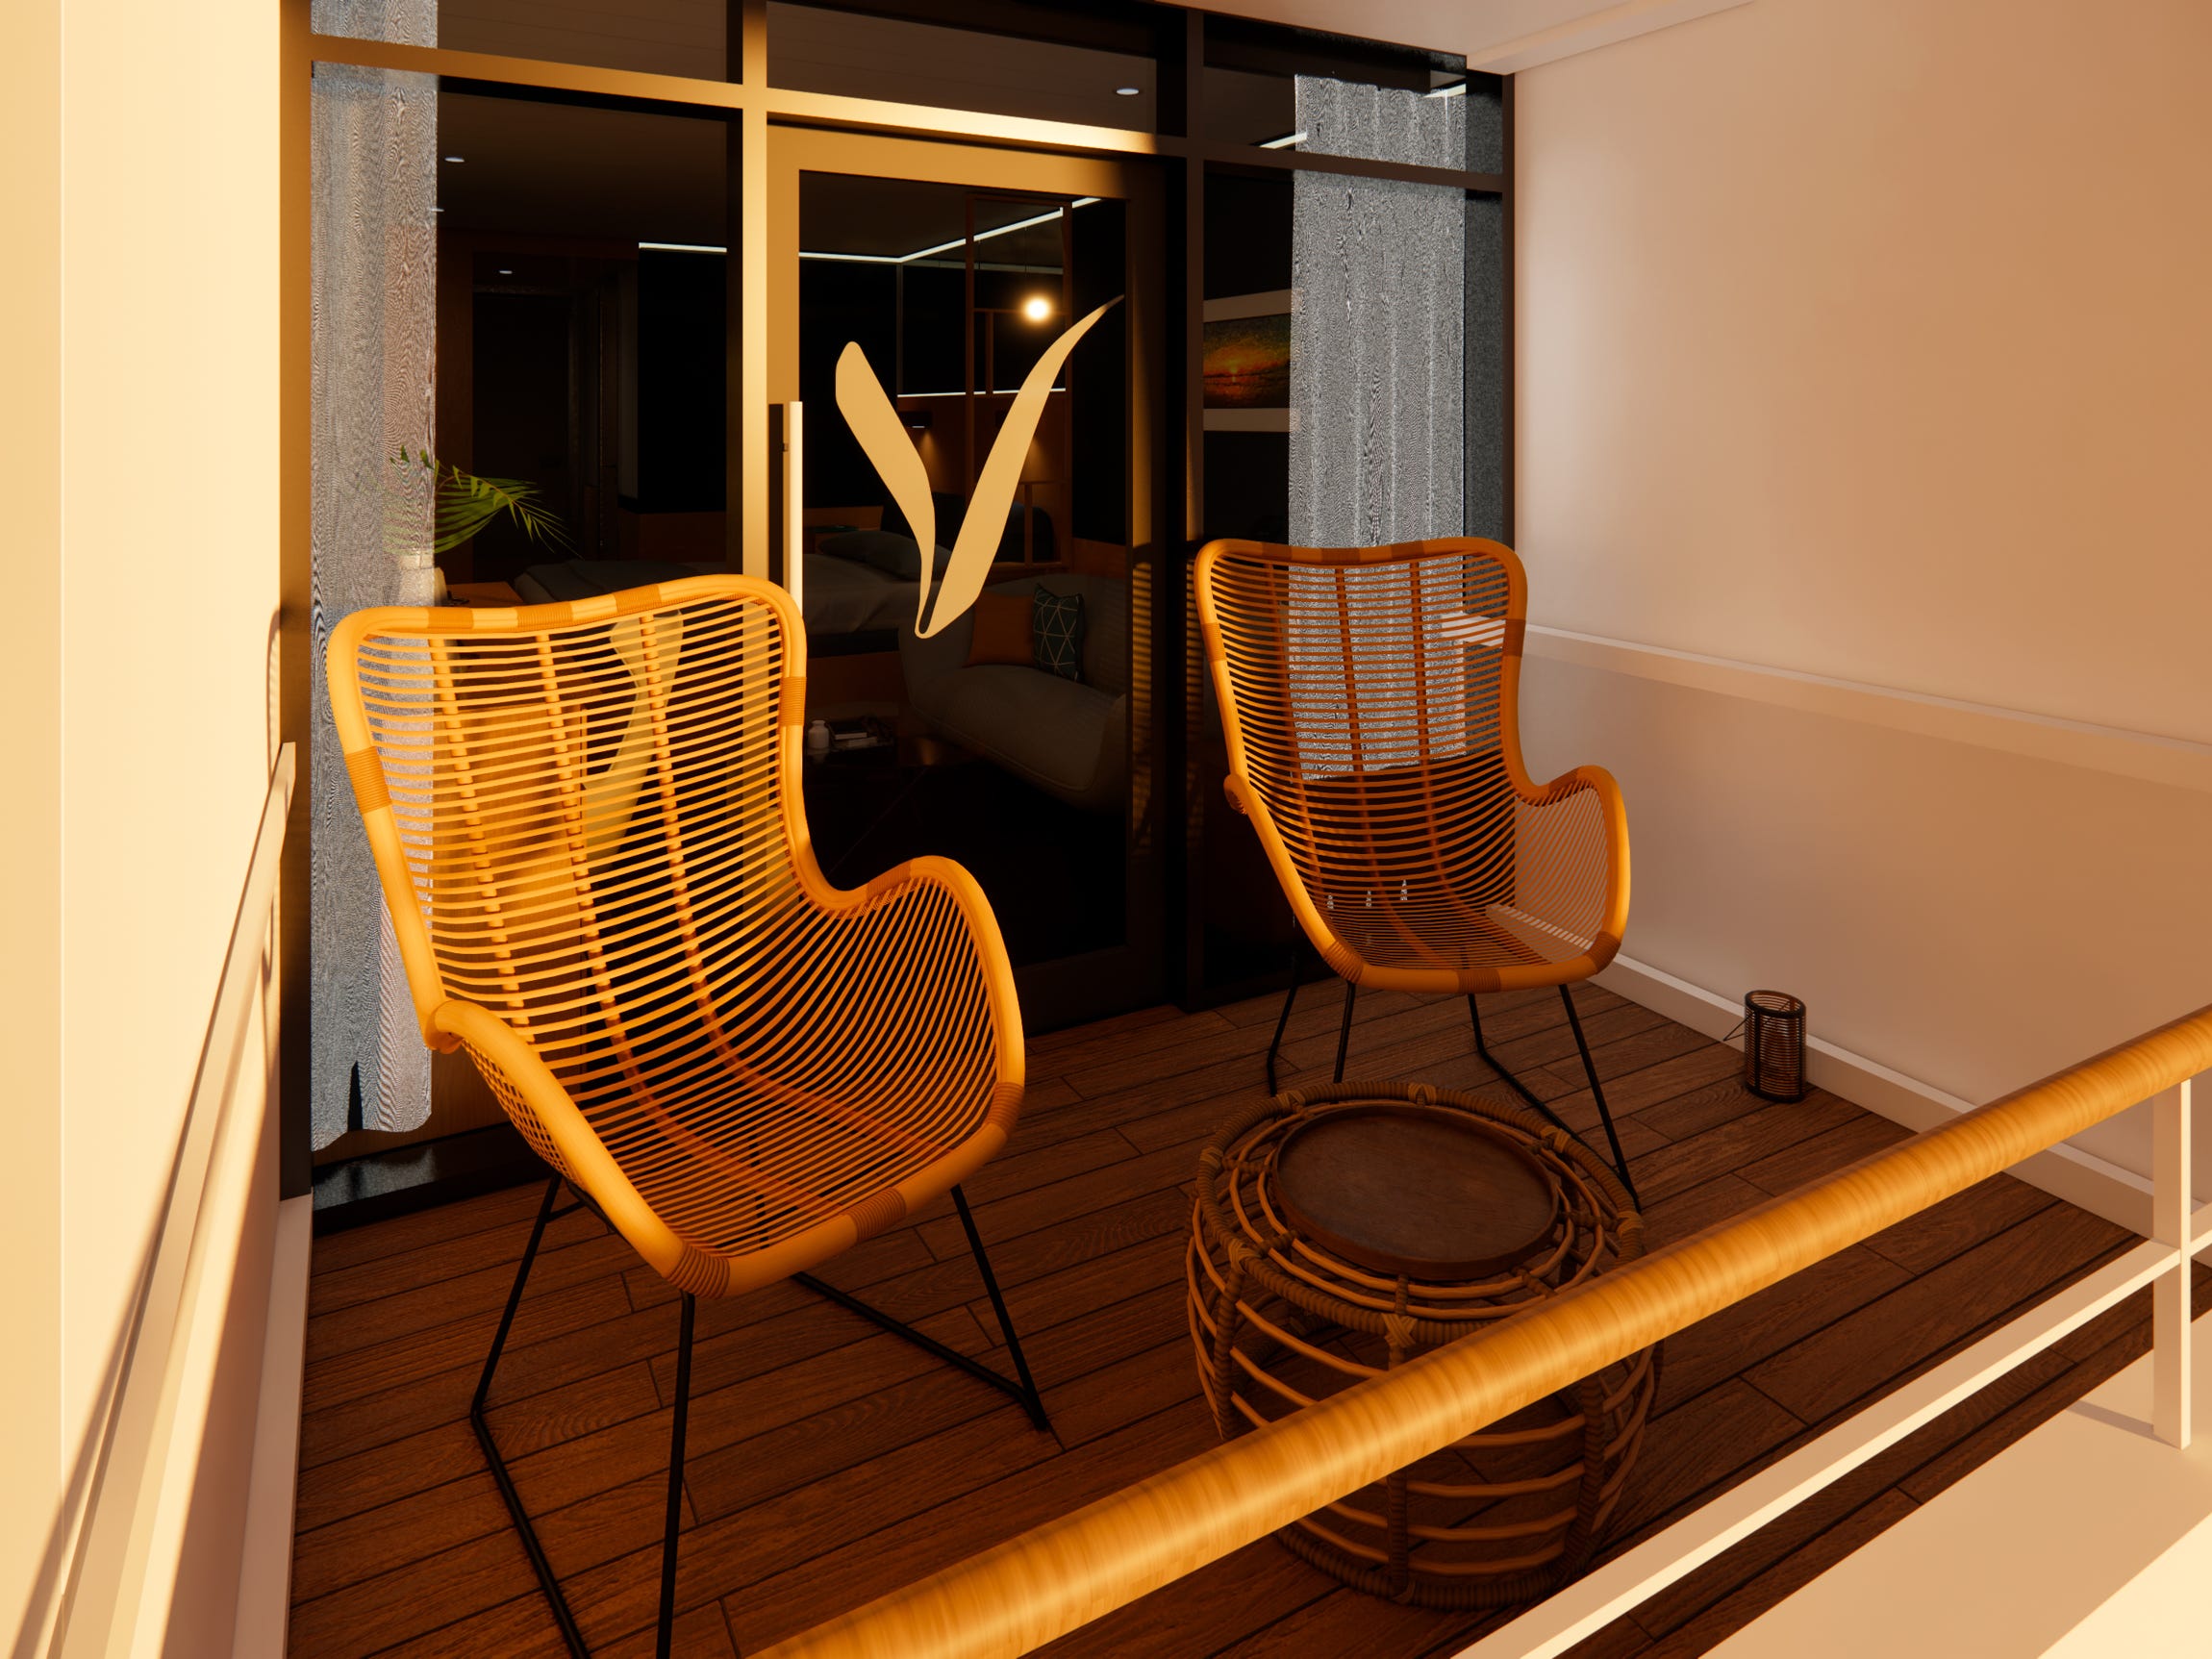 A rendering of a balcony with two chairs